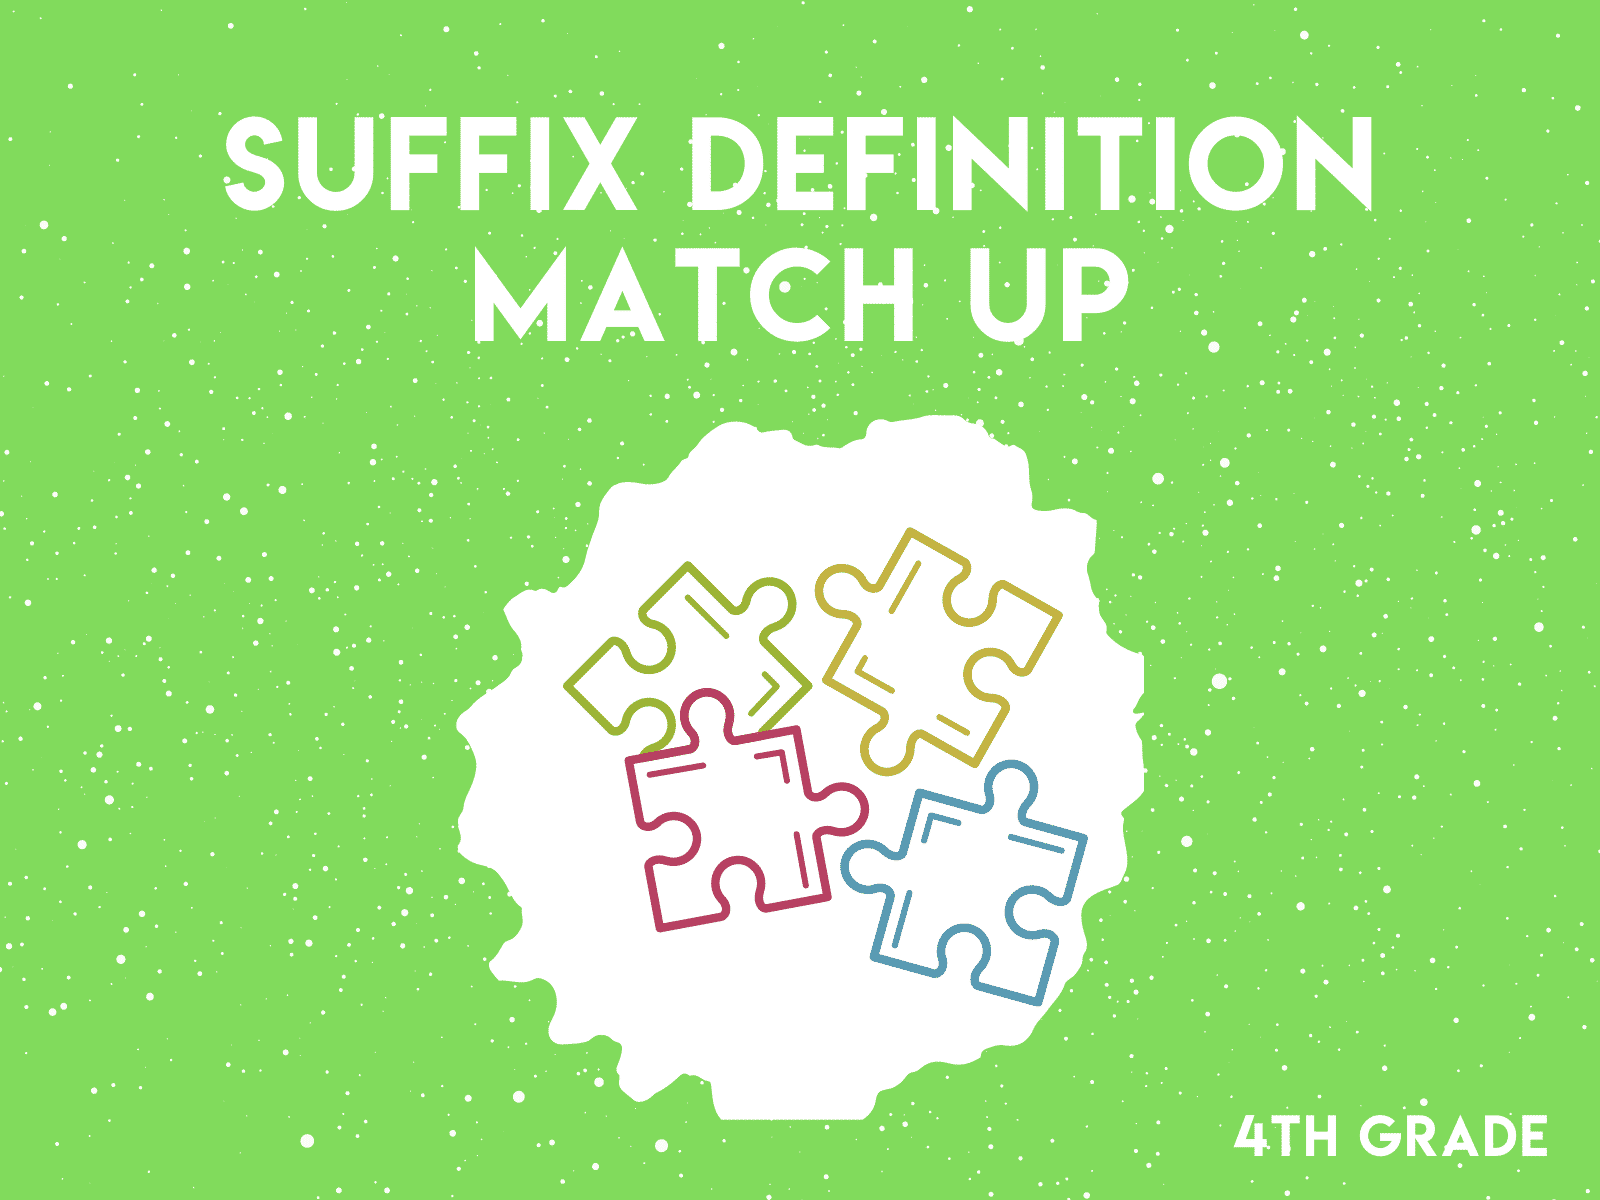 Match the suffix with its definition in the fourth grade reading practice activity.